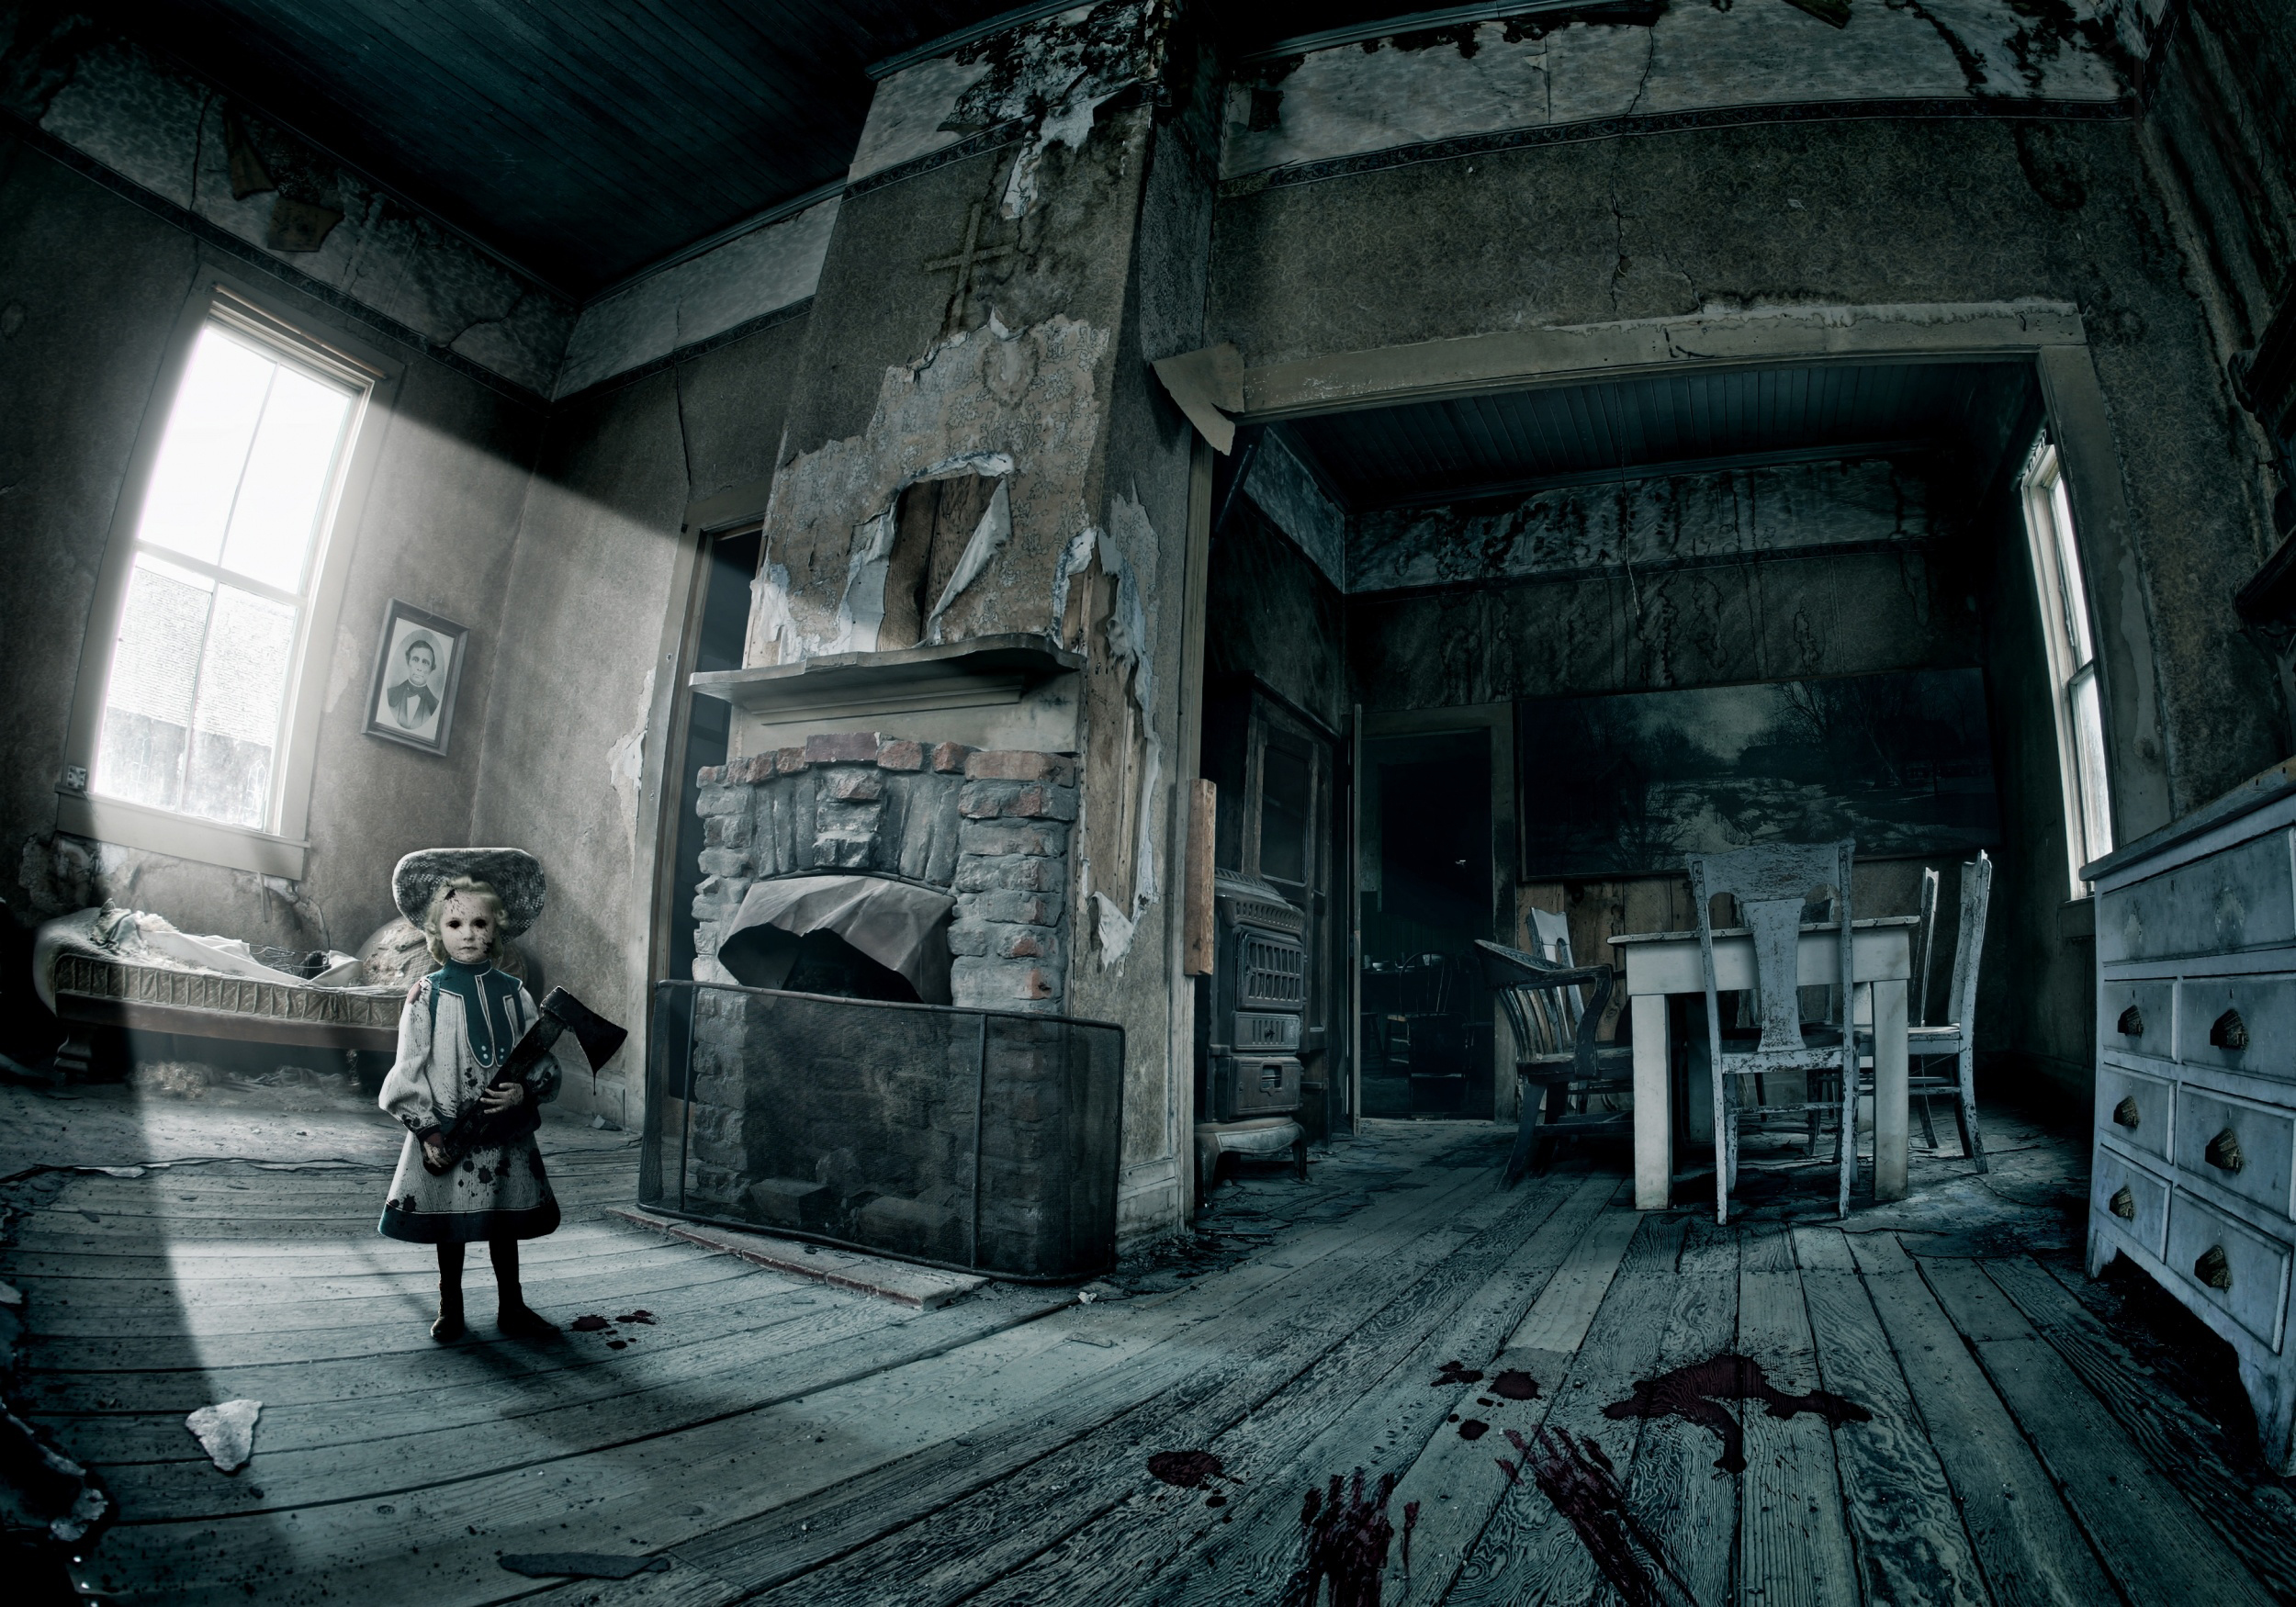 Download wallpaper blood doll horror axe old abandoned house